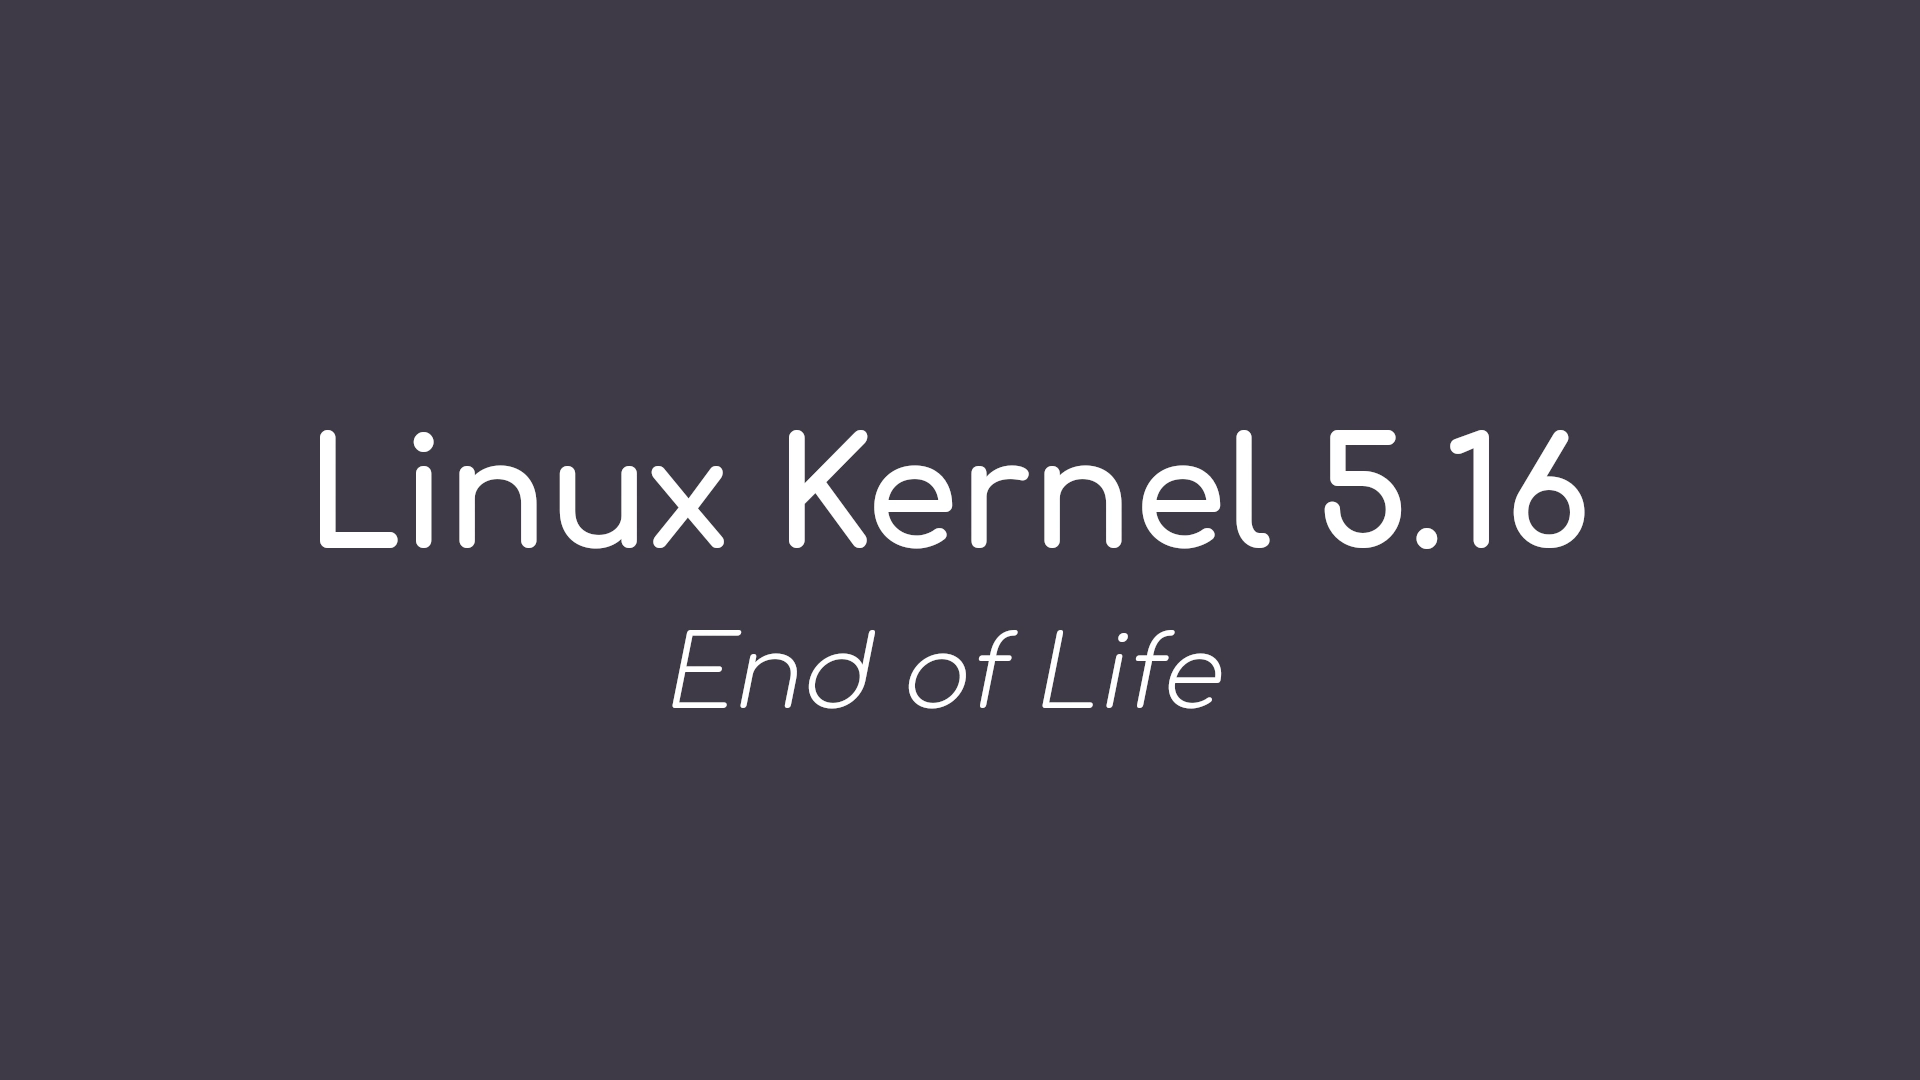 Linux Kernel 5.16 Reaches End of Life, Users Urged to Upgrade to Linux Kernel 5.17